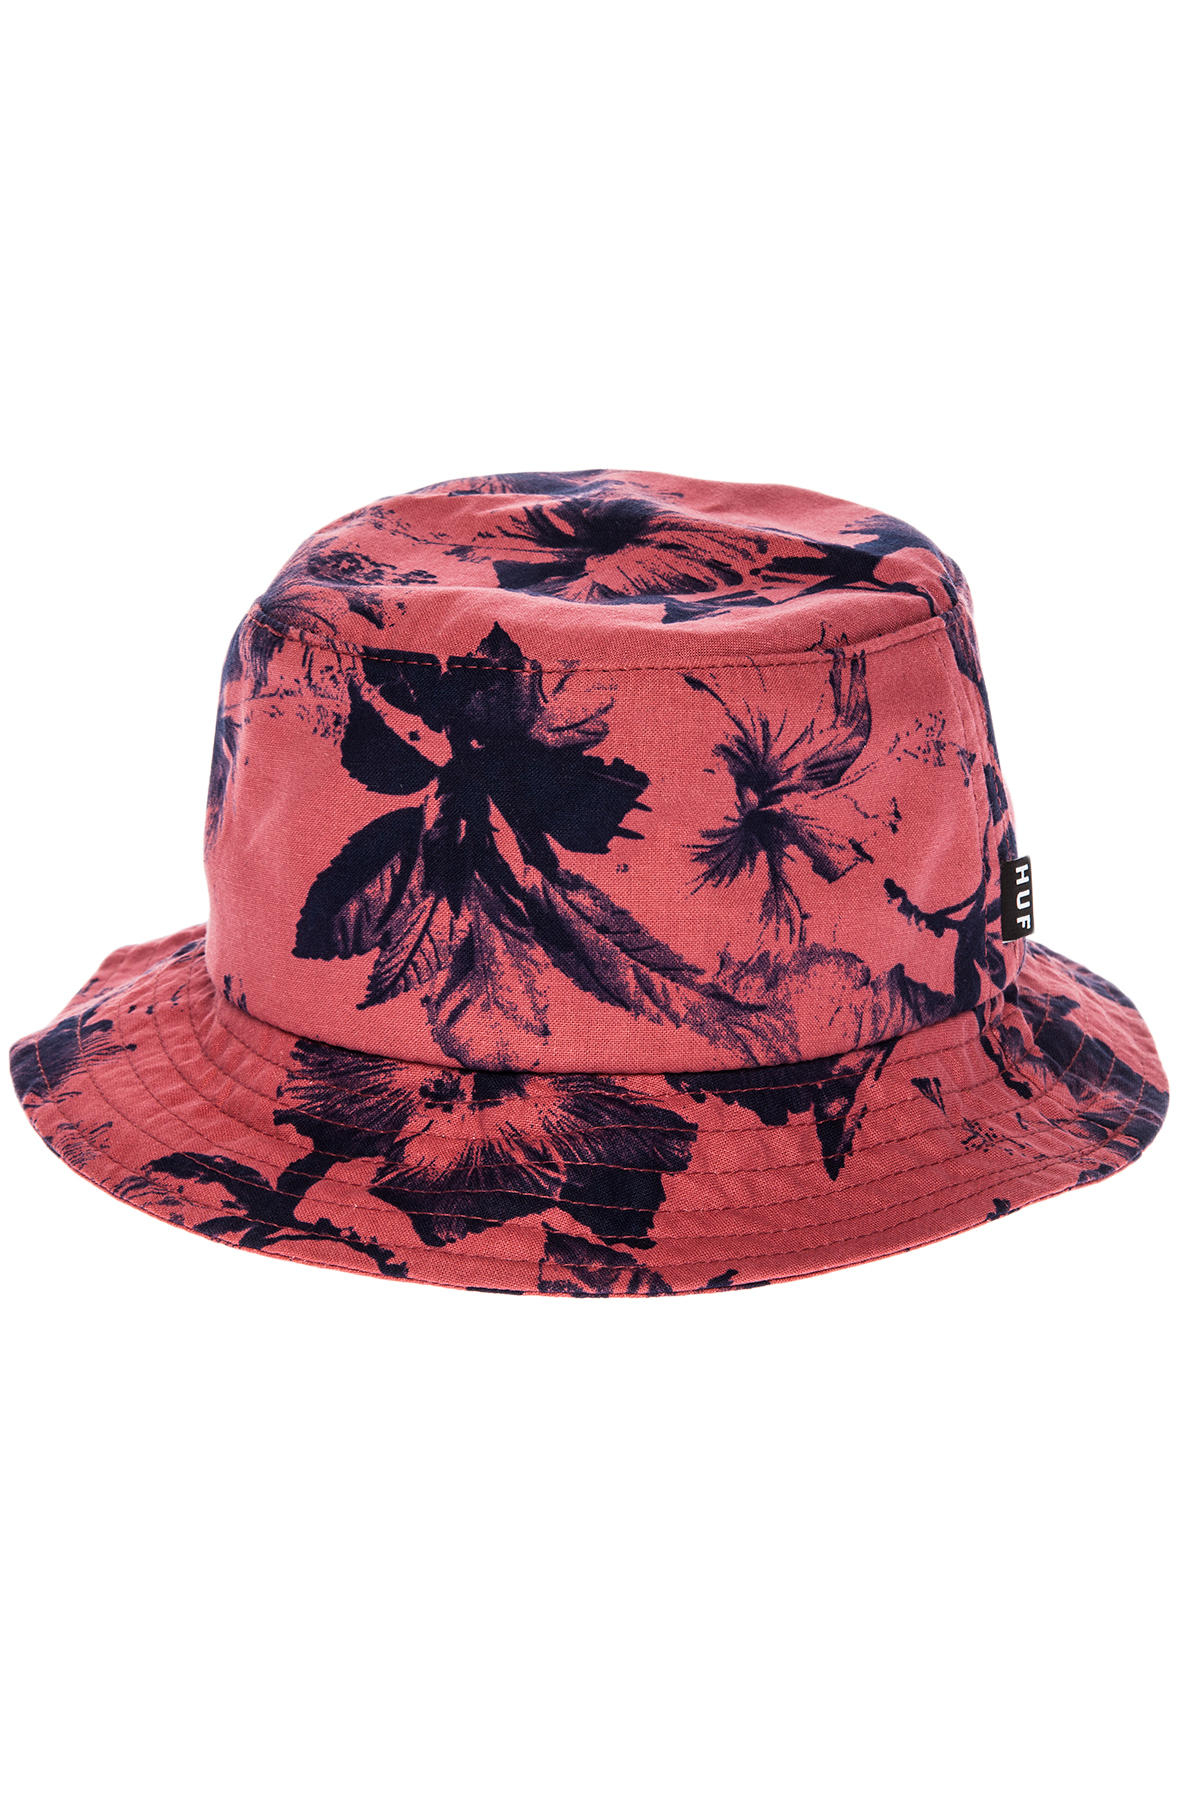 Lyst - Huf The Floral Bucket Hat in Pink for Men